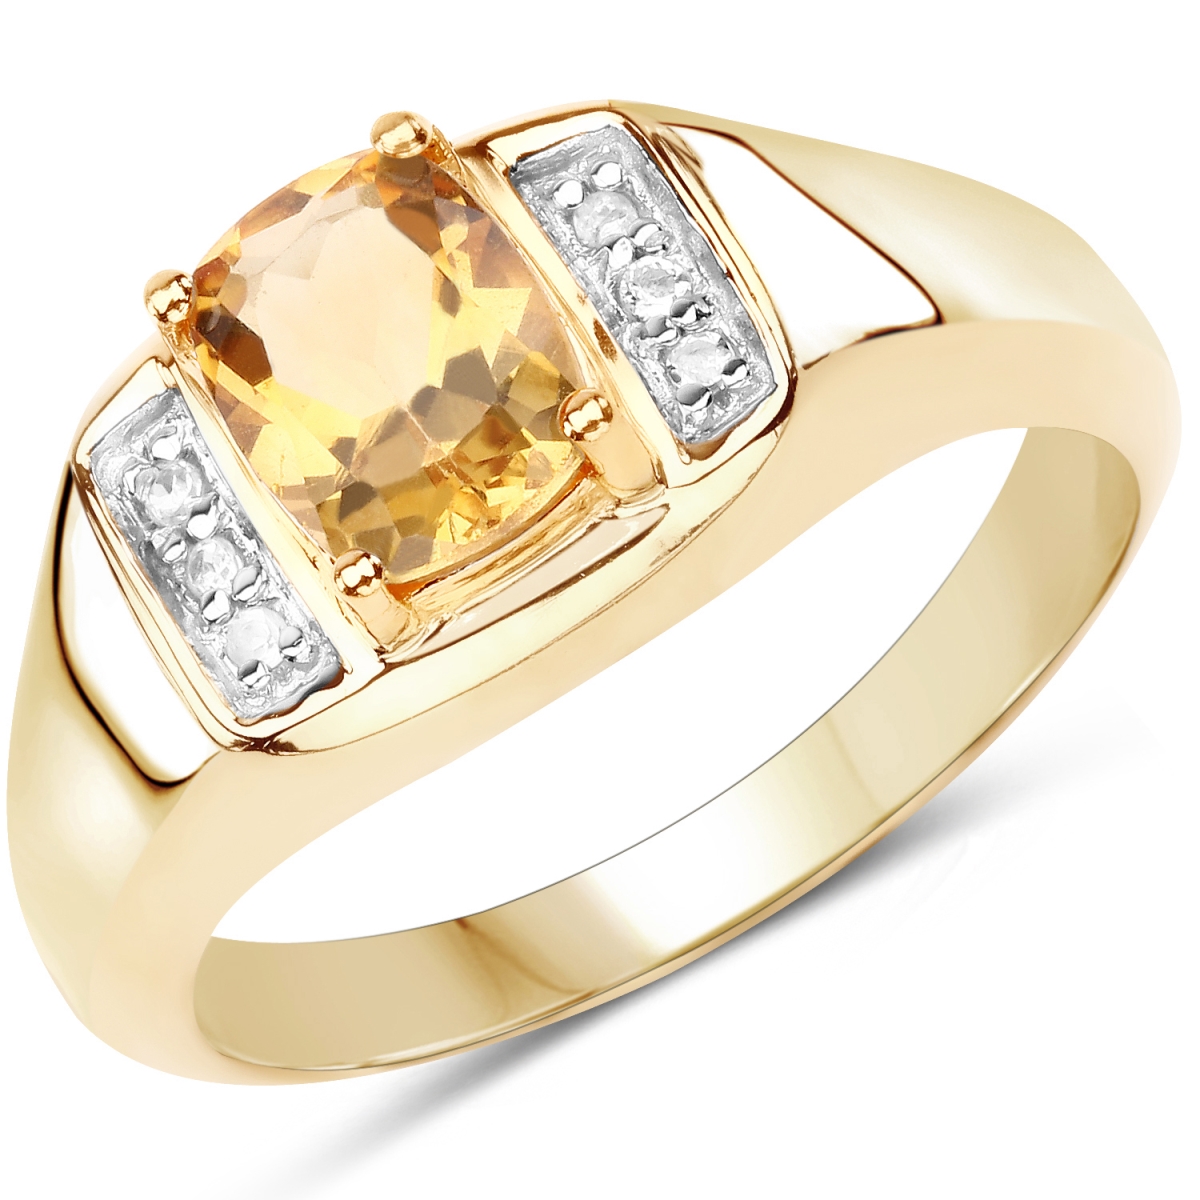 Picture of Malaika QR9437MCWT-SS14KY-10.50 14K Yellow Gold Plated 1.36 Carat Genuine Citrine & White Topaz 0.925 Sterling Silver Ring